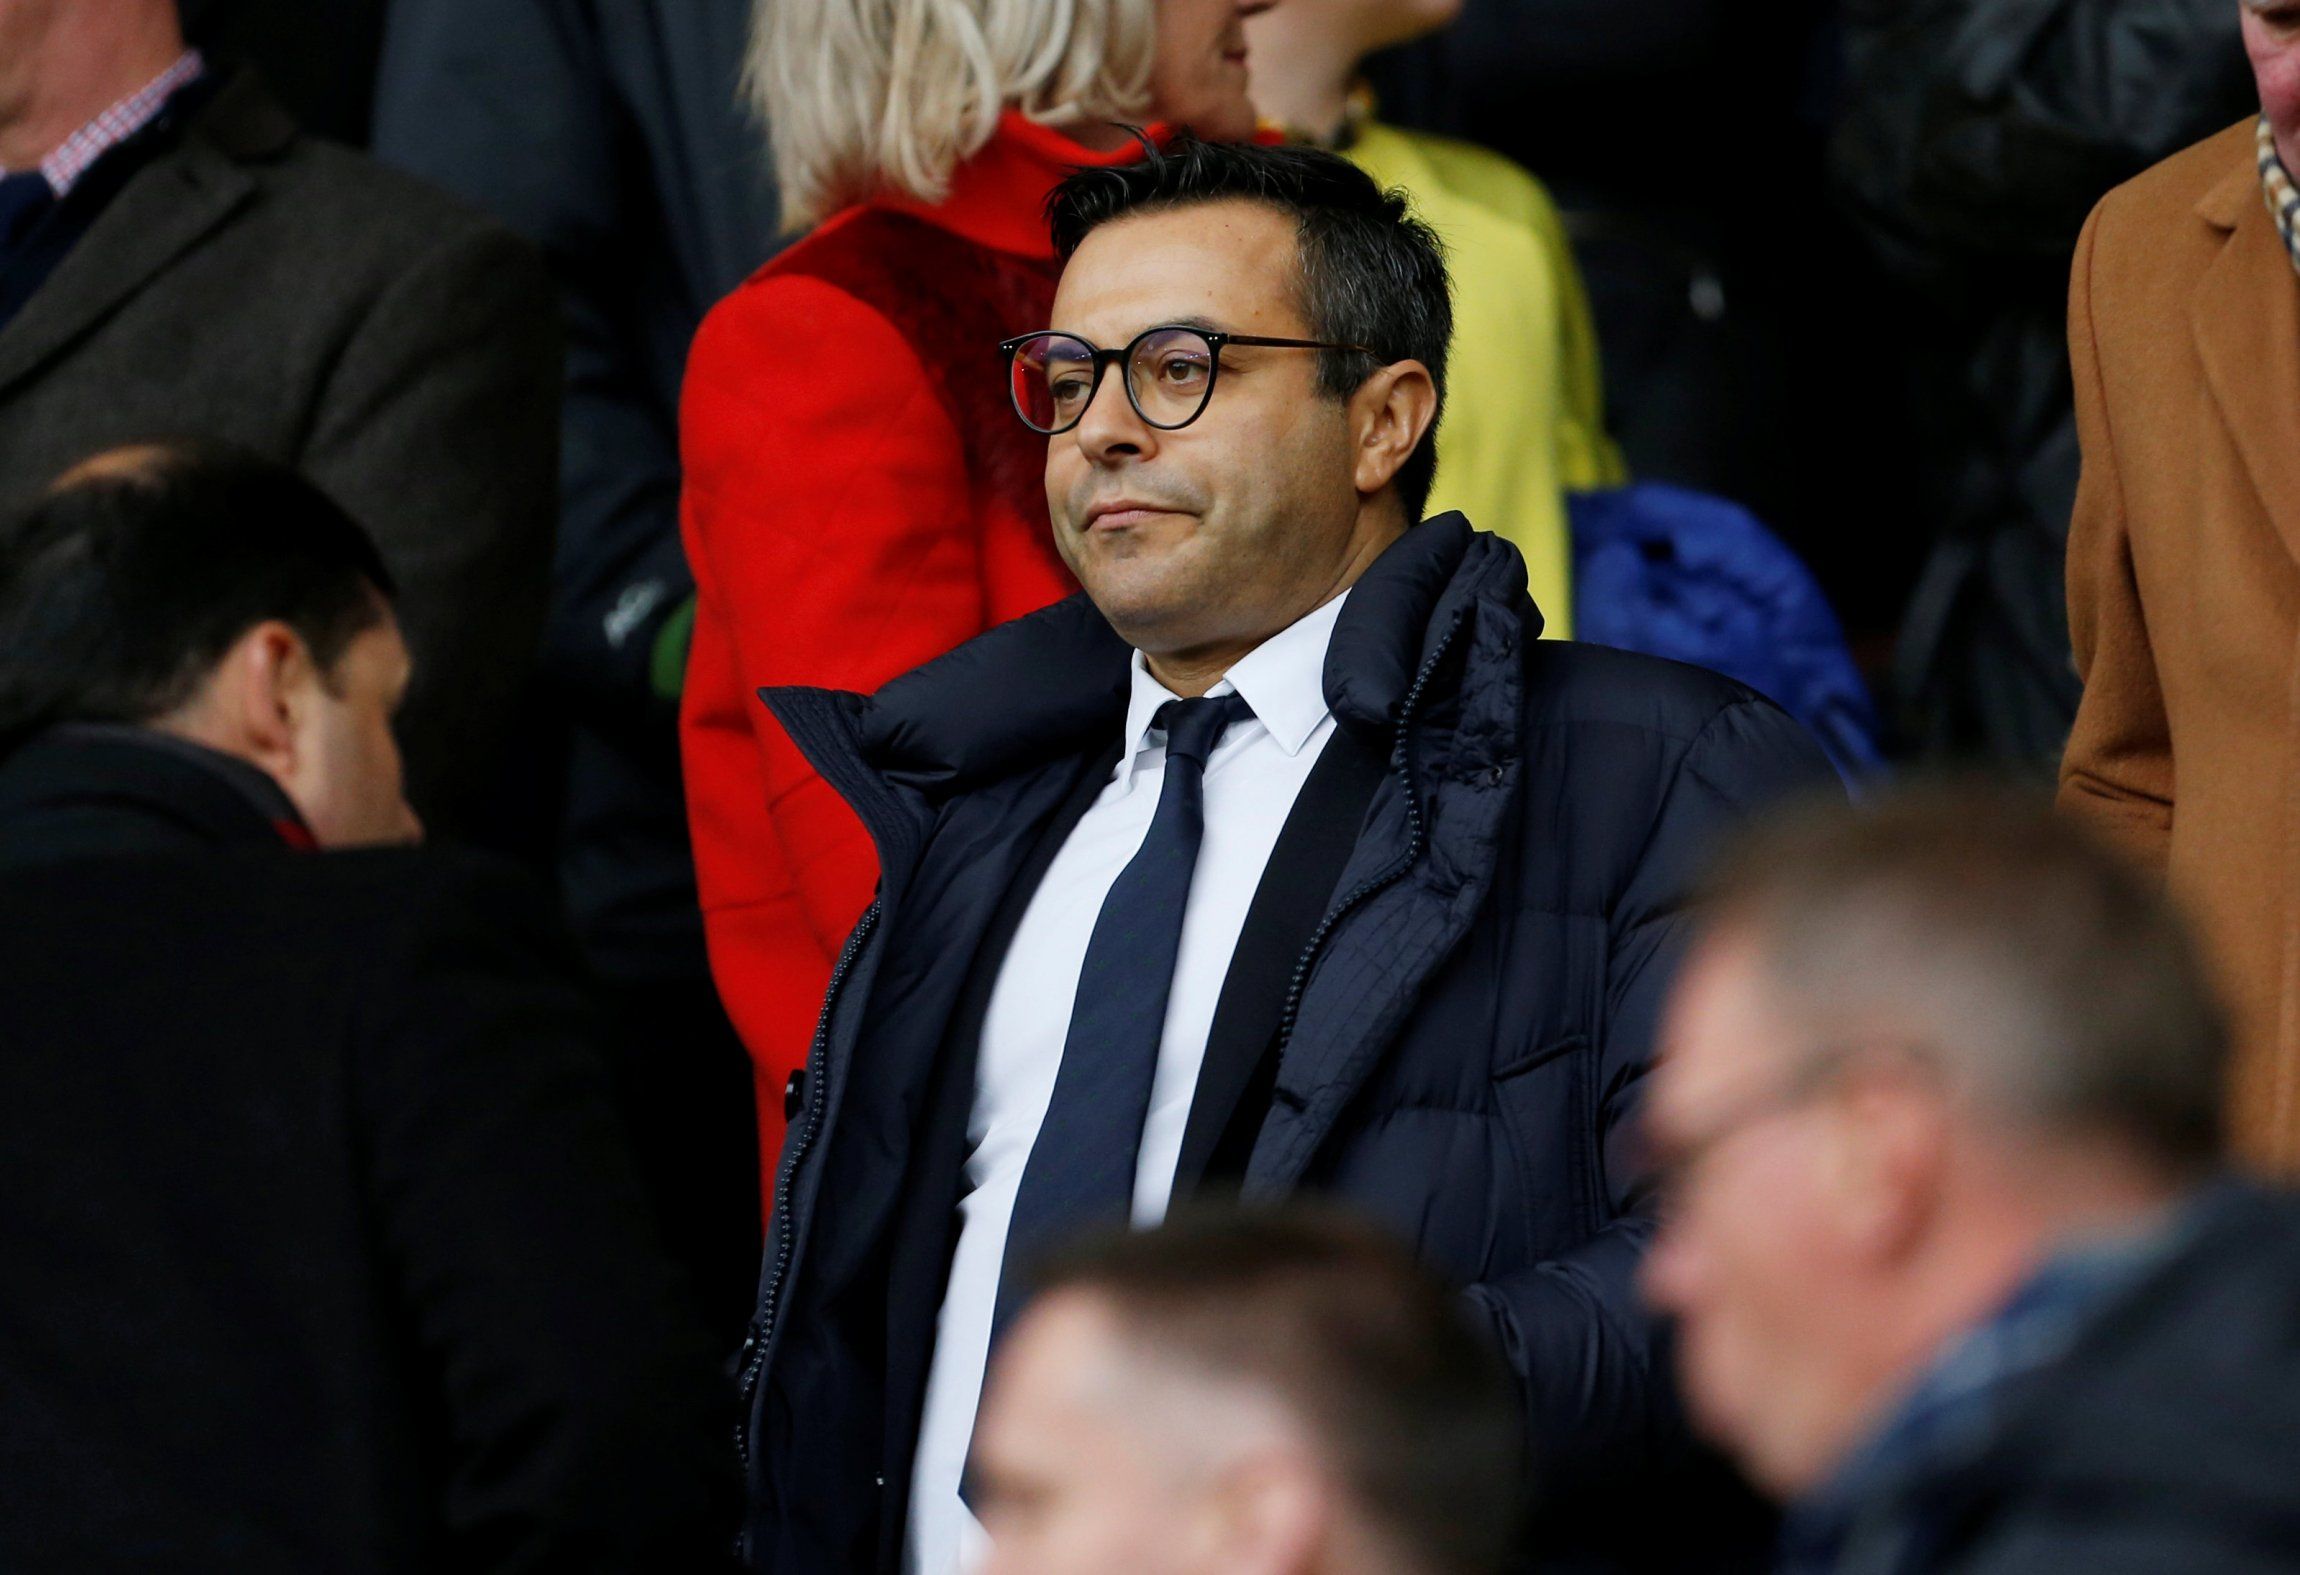 Leeds United chairman Andrea Radrizzani looks on from the stand as his club faces Sheffield United